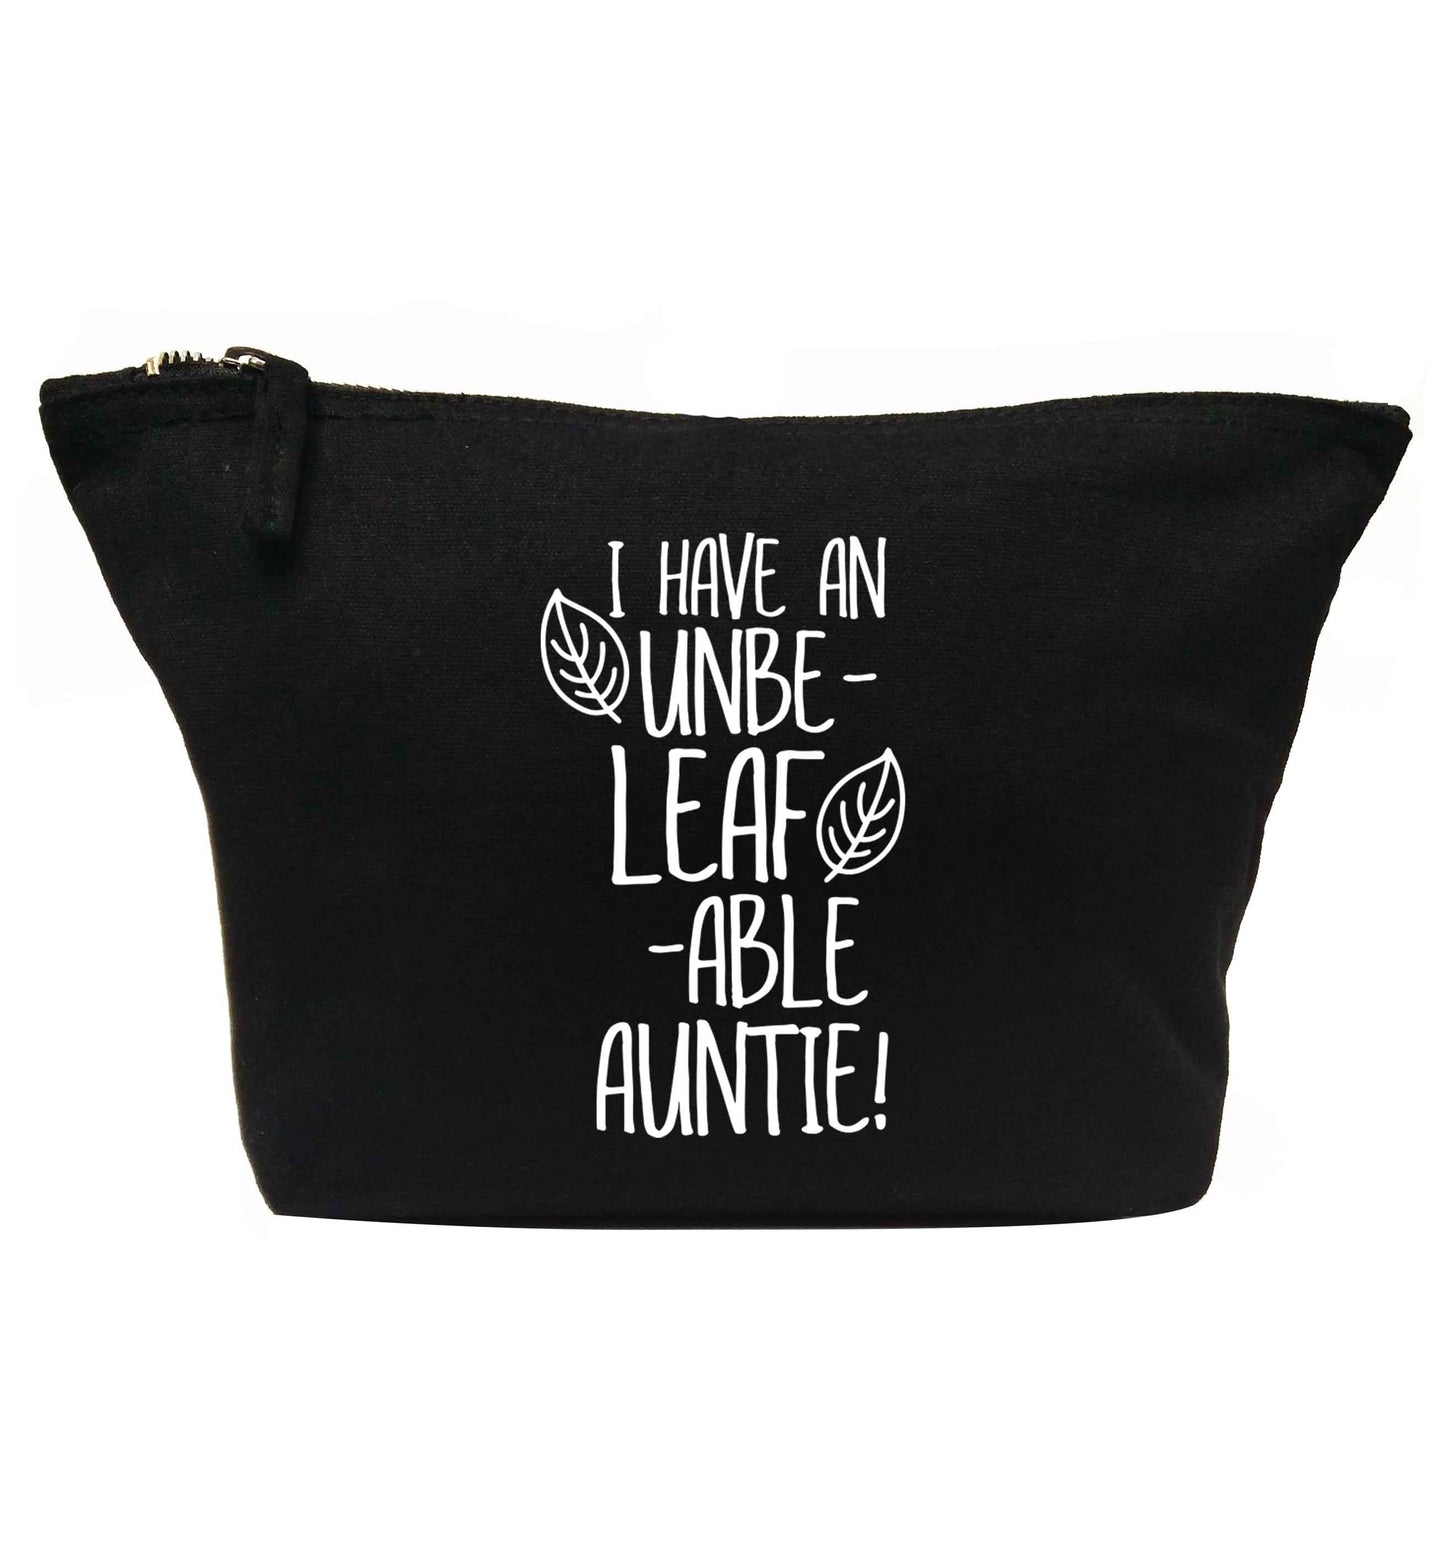 I have an unbe-leaf-able auntie | makeup / wash bag